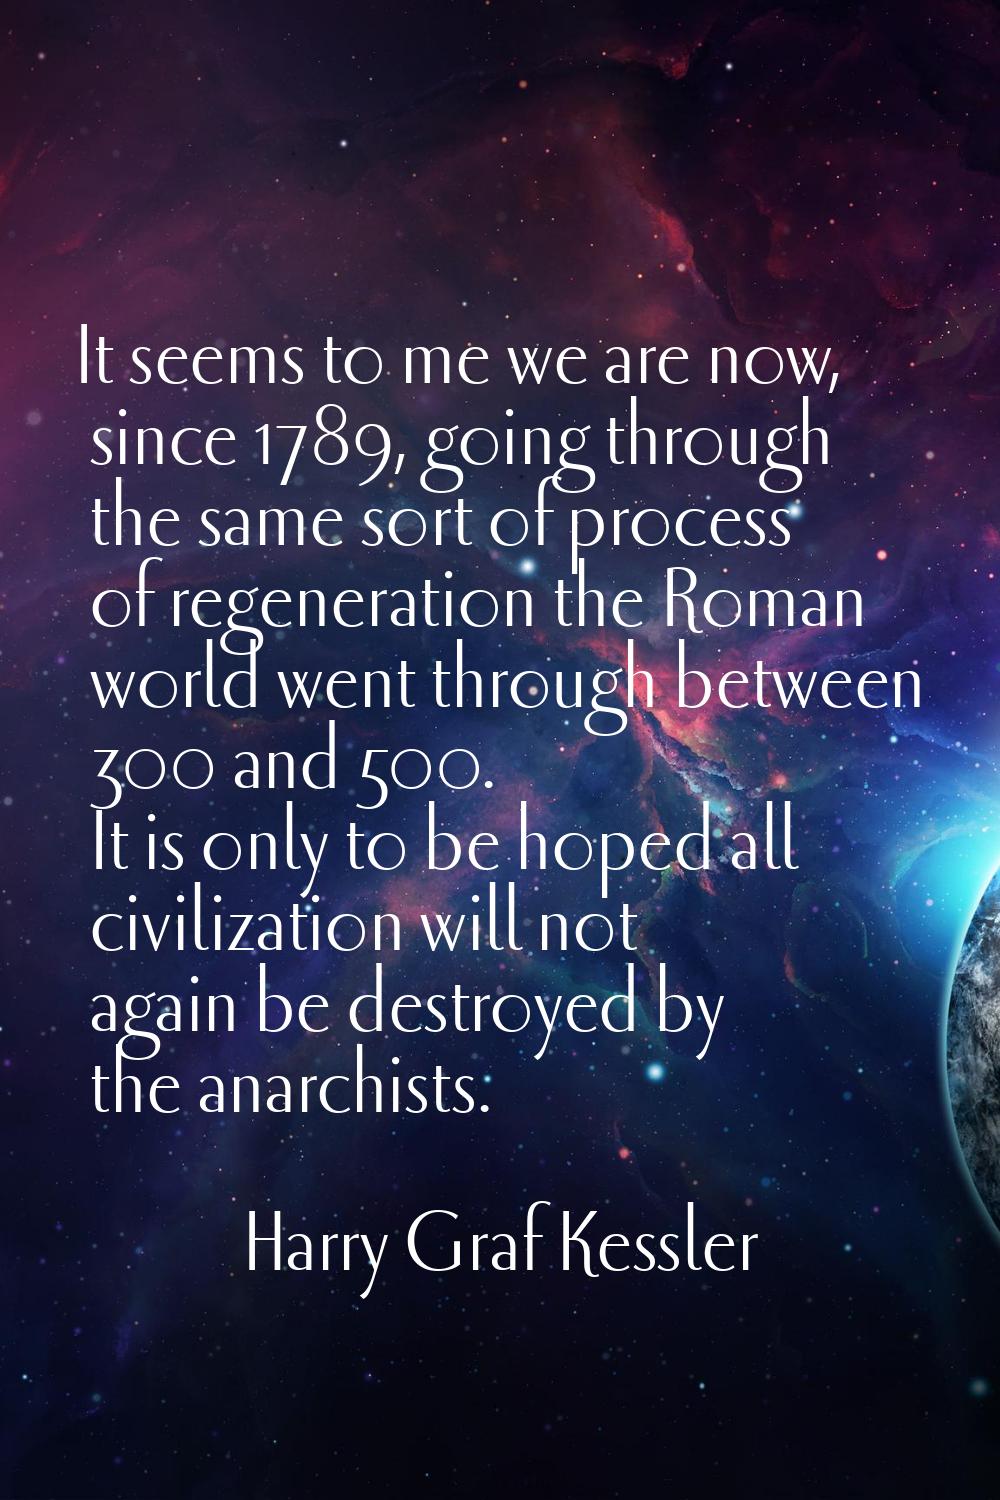 It seems to me we are now, since 1789, going through the same sort of process of regeneration the R